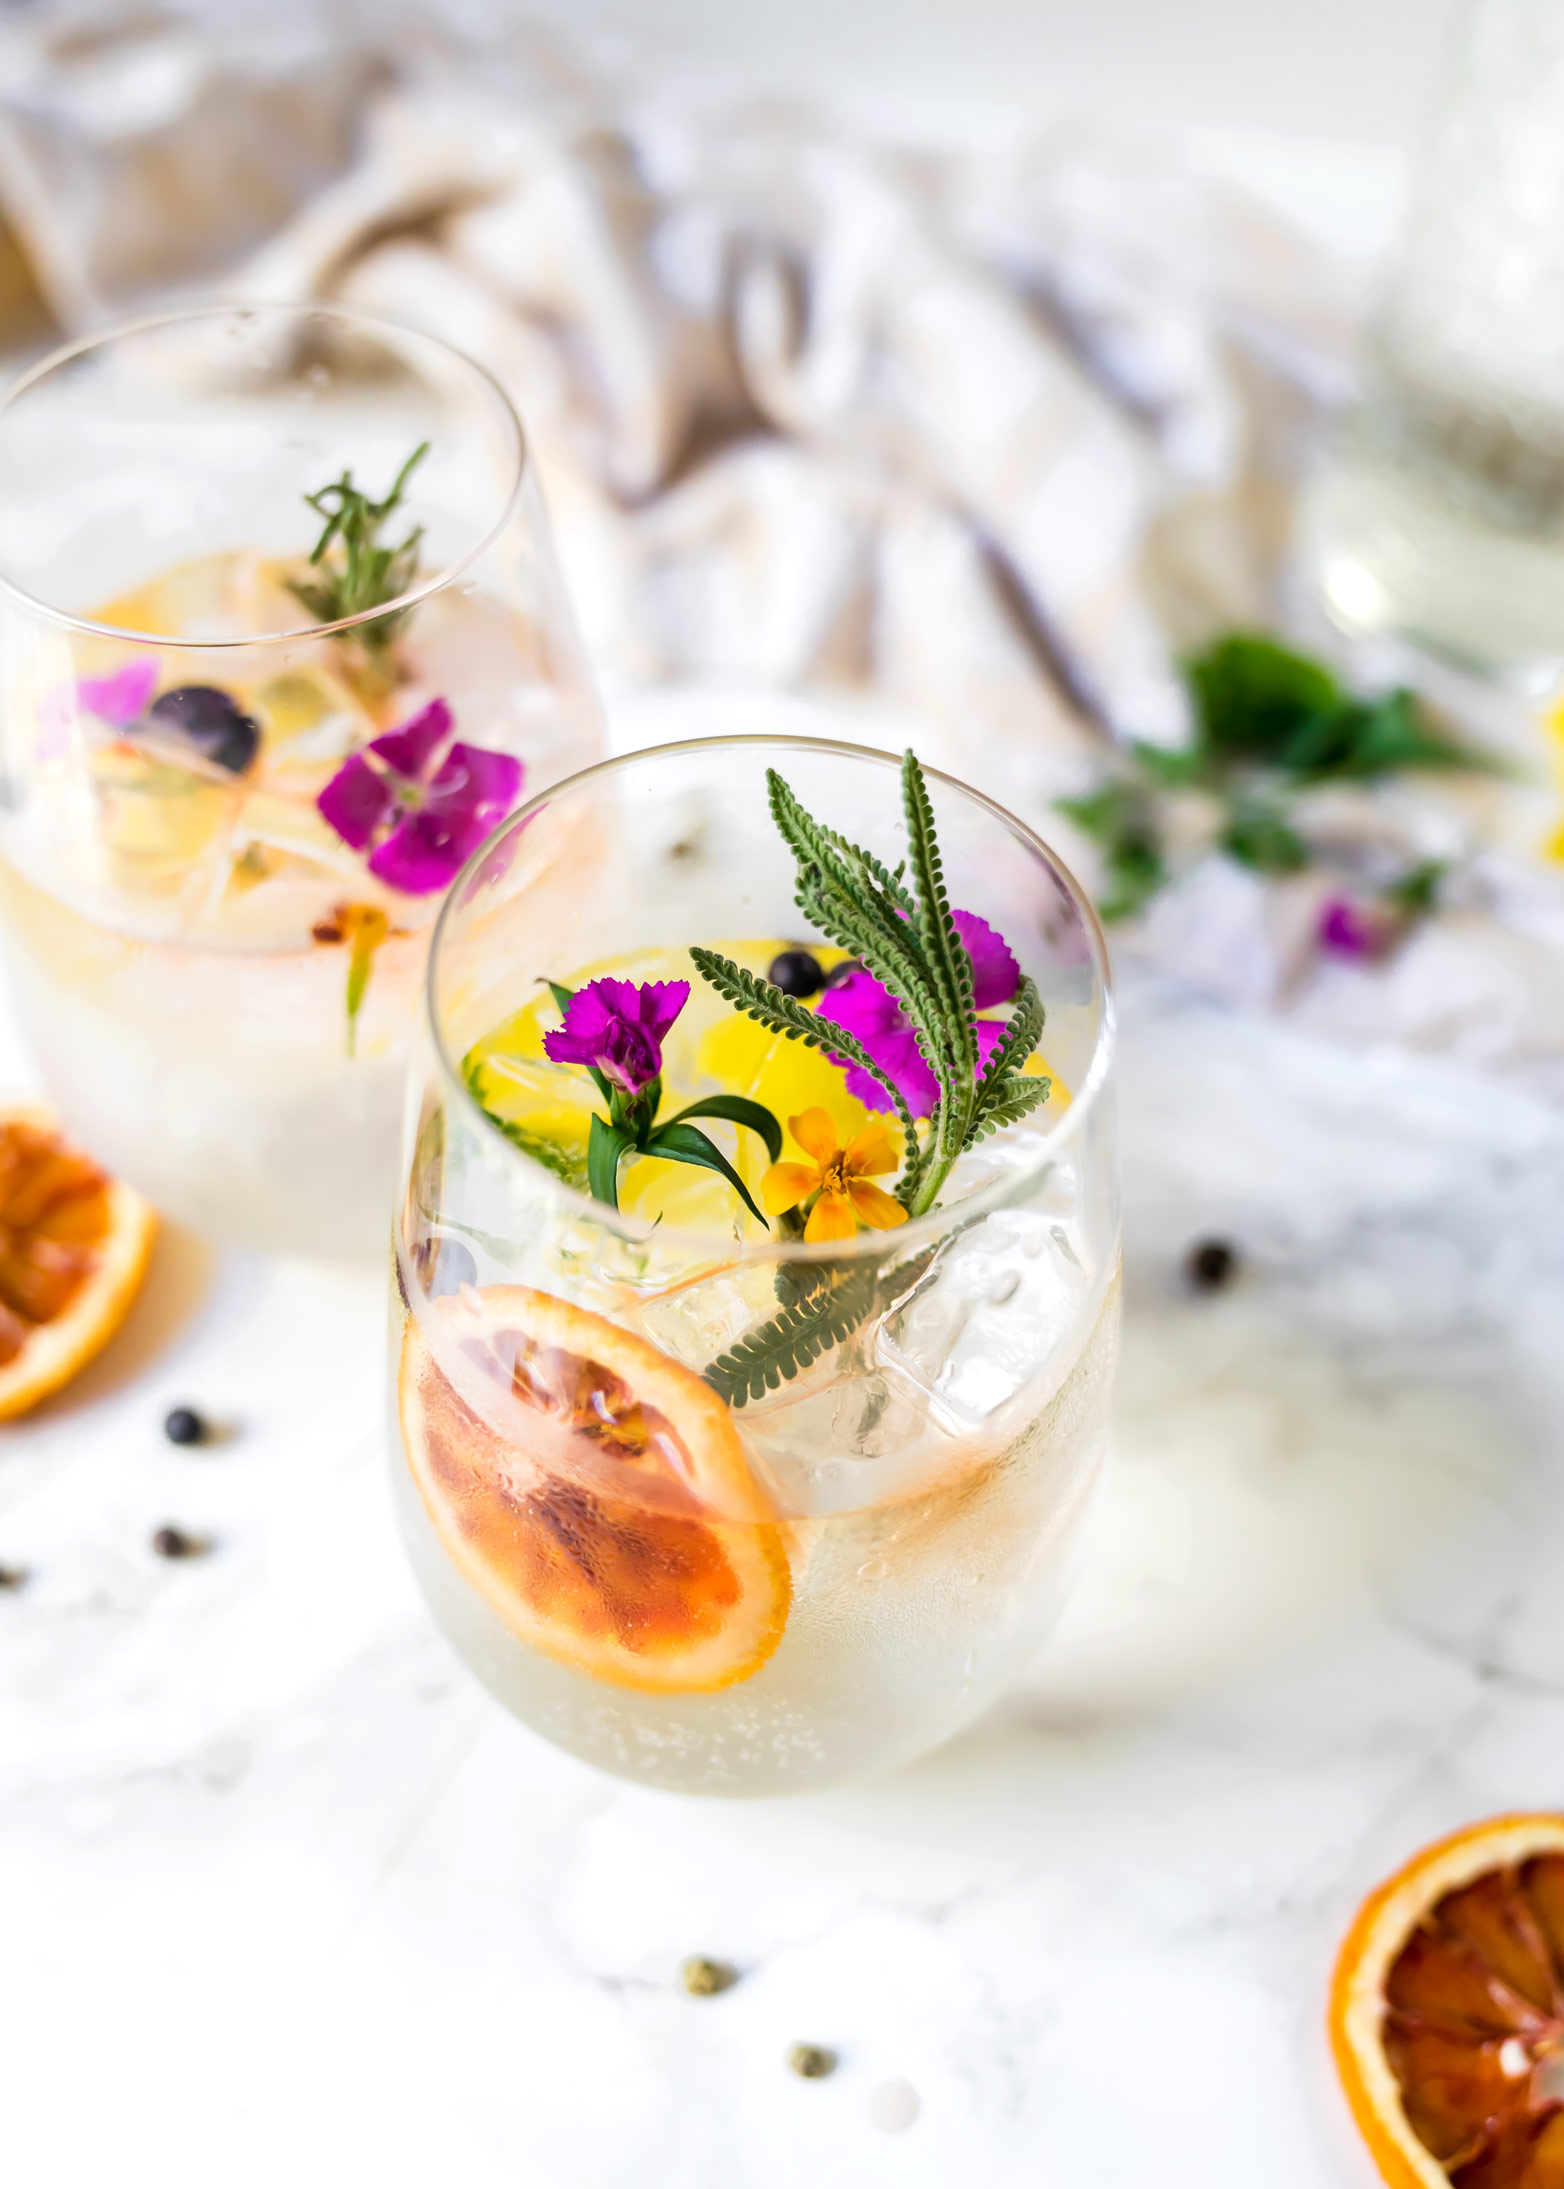 A Complete Guide to Edible Flowers for Drinks and Cocktails